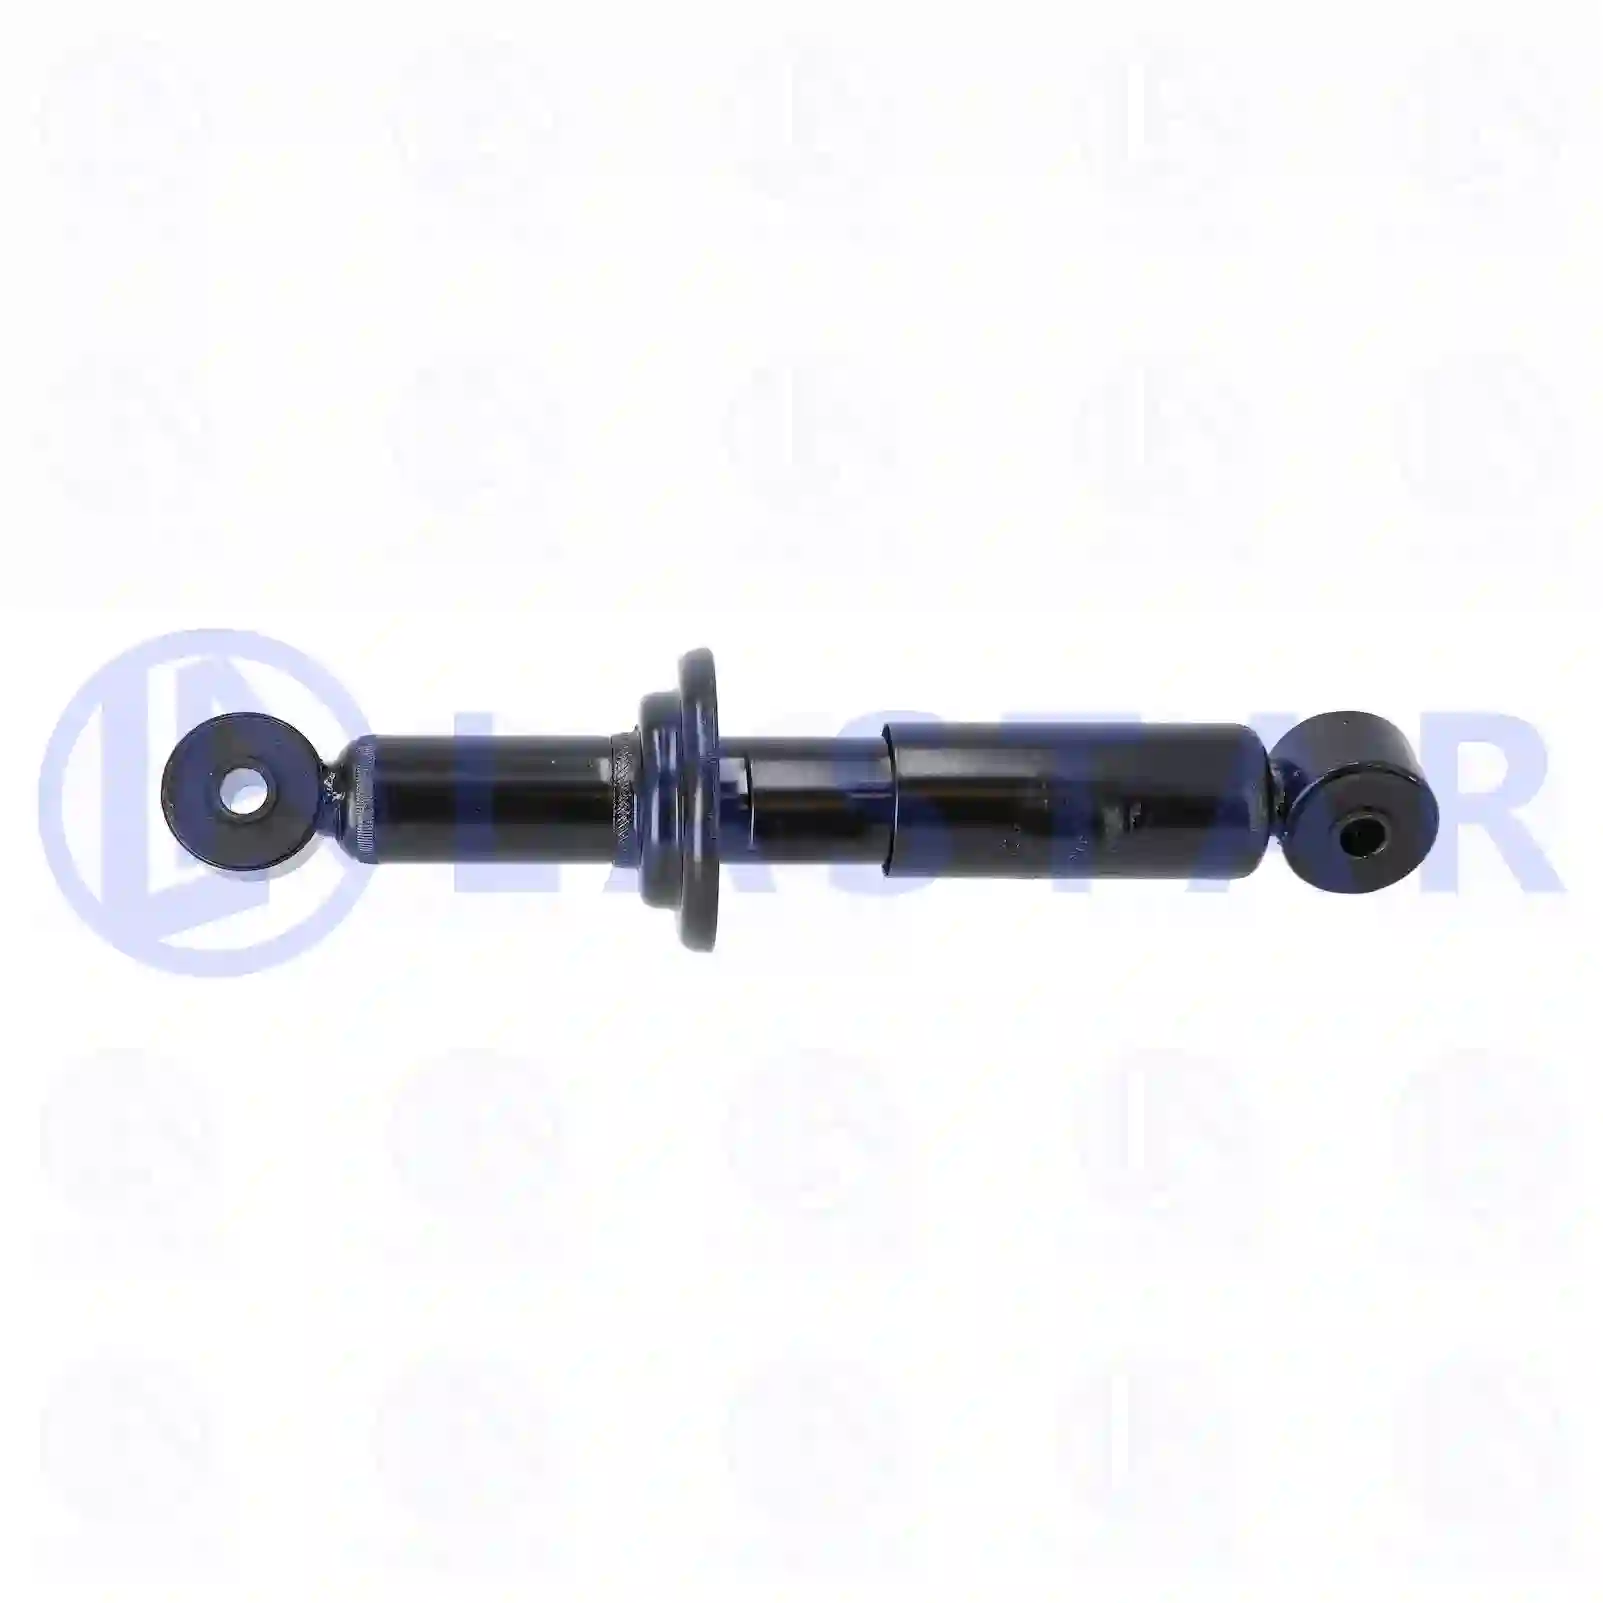 Cabin shock absorber, 77735717, 1629721, , , , ||  77735717 Lastar Spare Part | Truck Spare Parts, Auotomotive Spare Parts Cabin shock absorber, 77735717, 1629721, , , , ||  77735717 Lastar Spare Part | Truck Spare Parts, Auotomotive Spare Parts